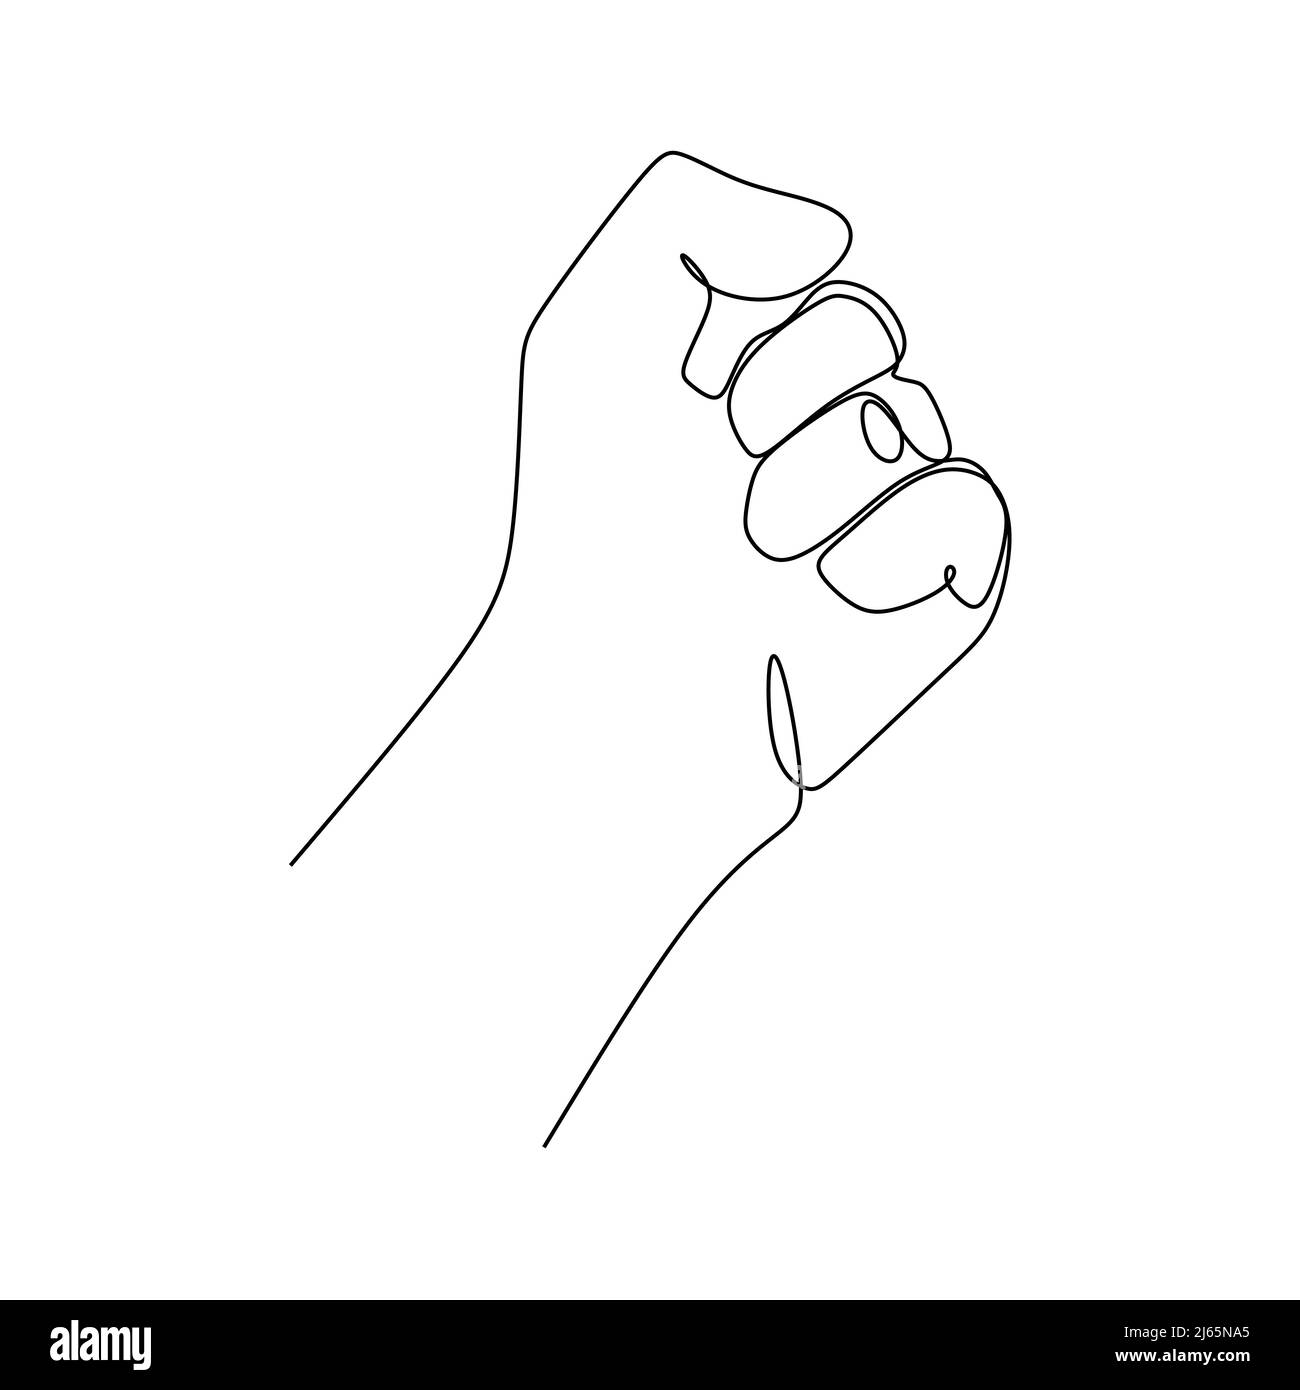 Clenched hand or fist gesture continuous line draw design. Sign and symbol of hand gestures. Single continuous drawing line. Hand drawn style art Stock Vector